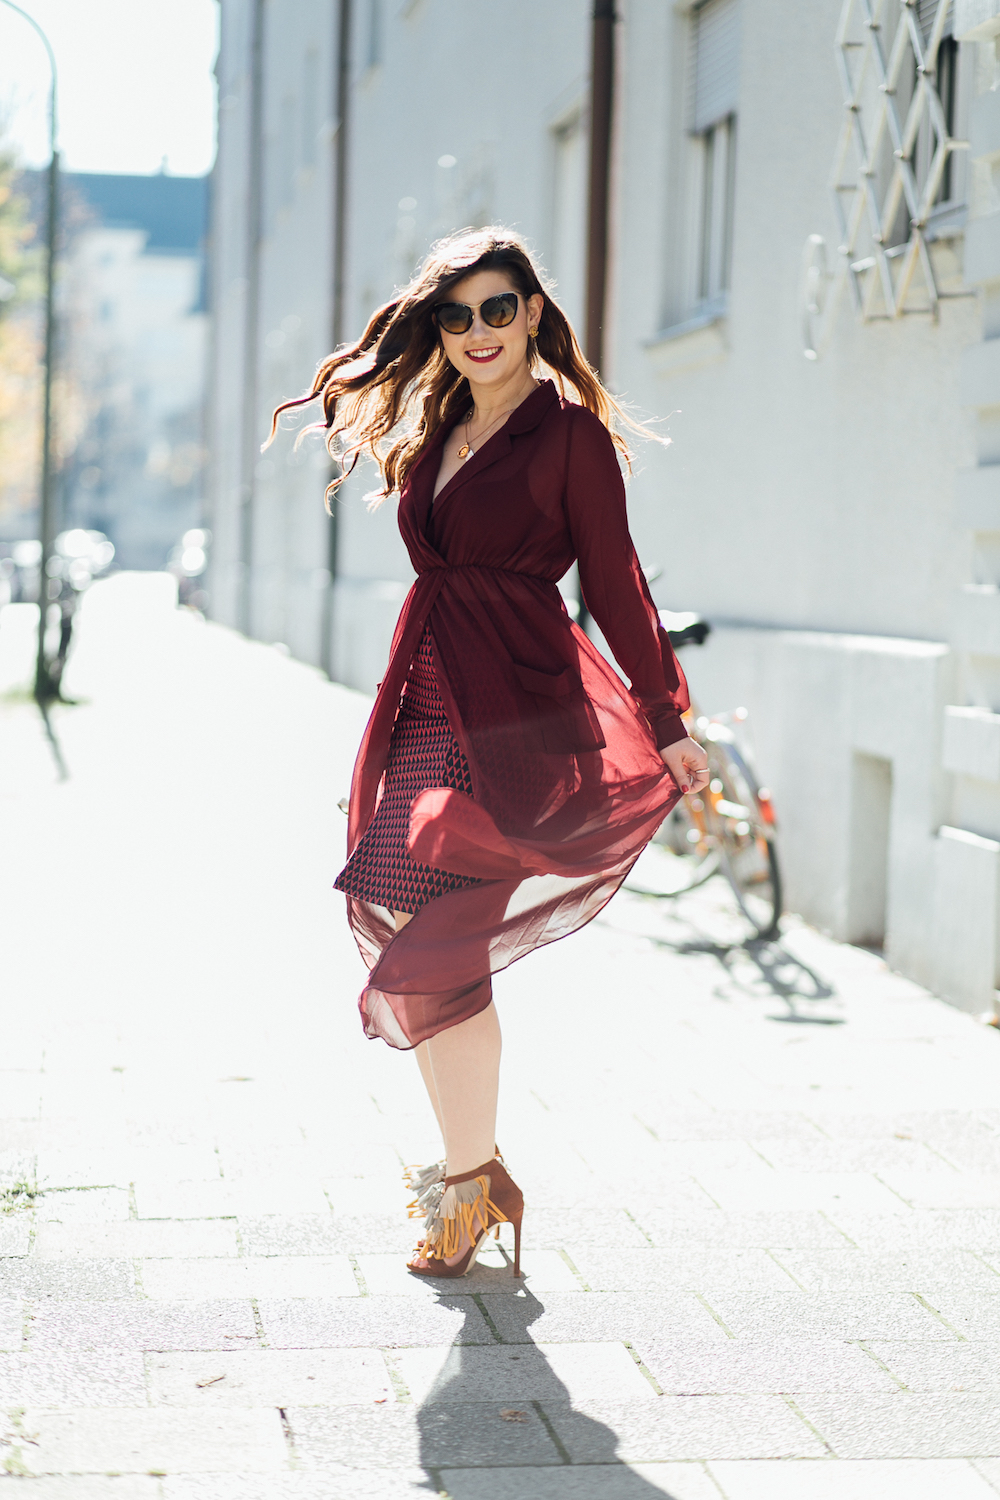 sara-bow-herbst-outfit-inspiration-rotes-flatter-kleid-chiffon